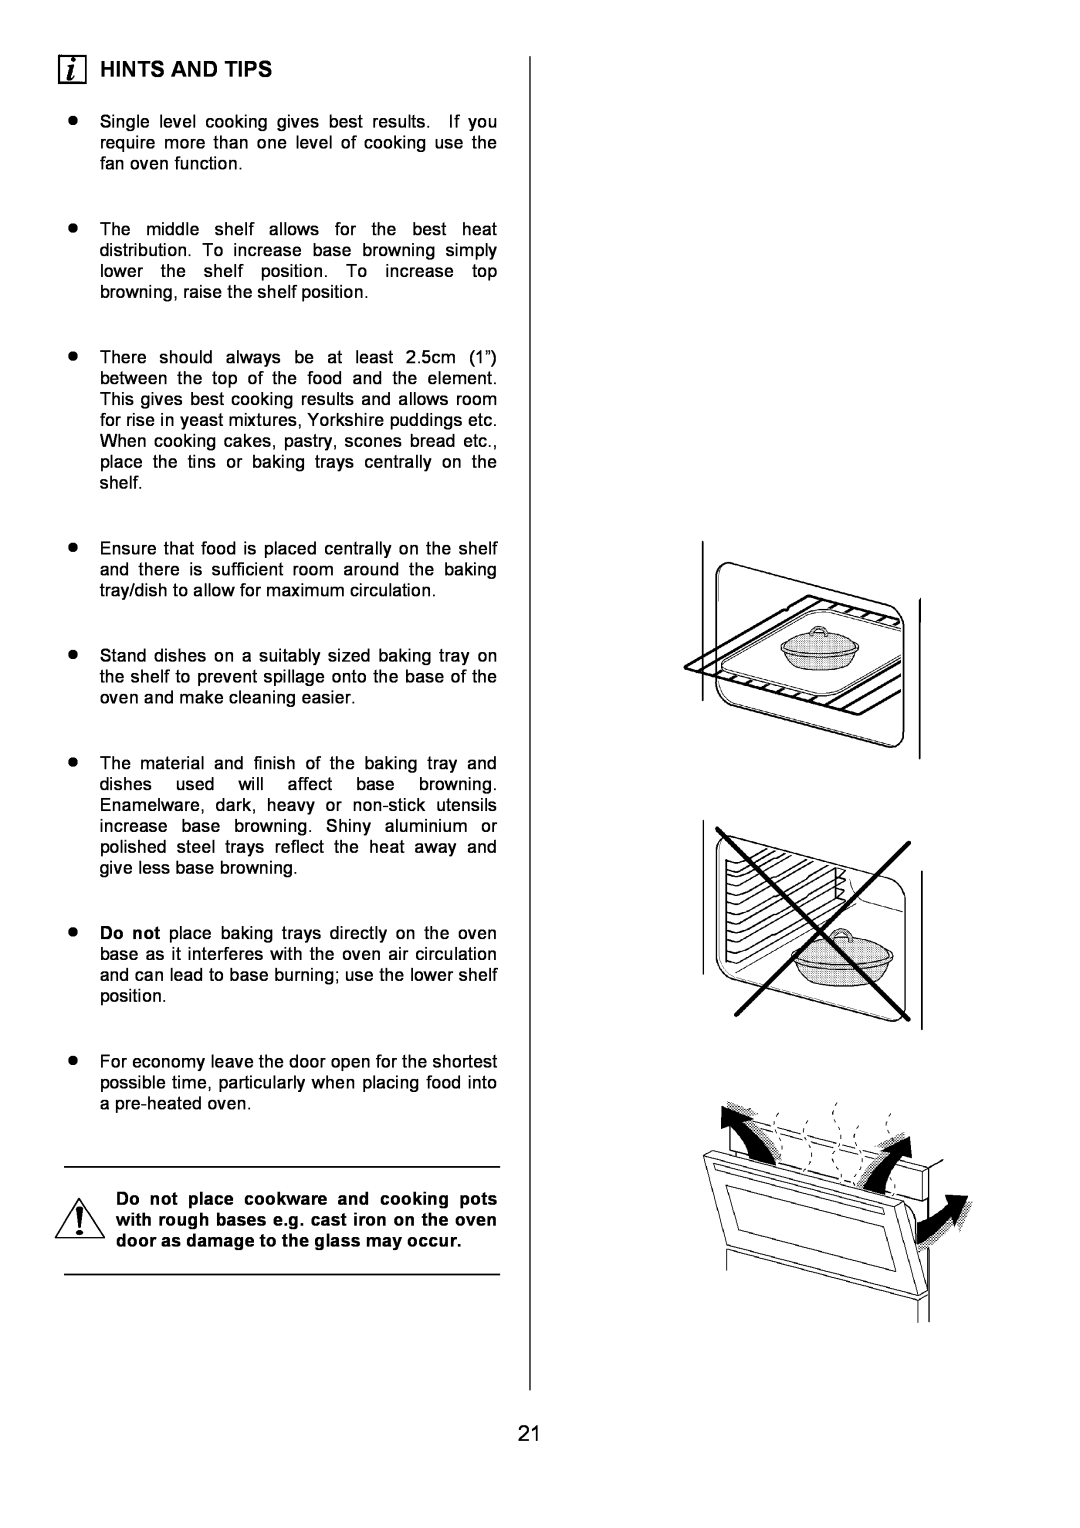 Electrolux D4101-4 operating instructions Hints And Tips 